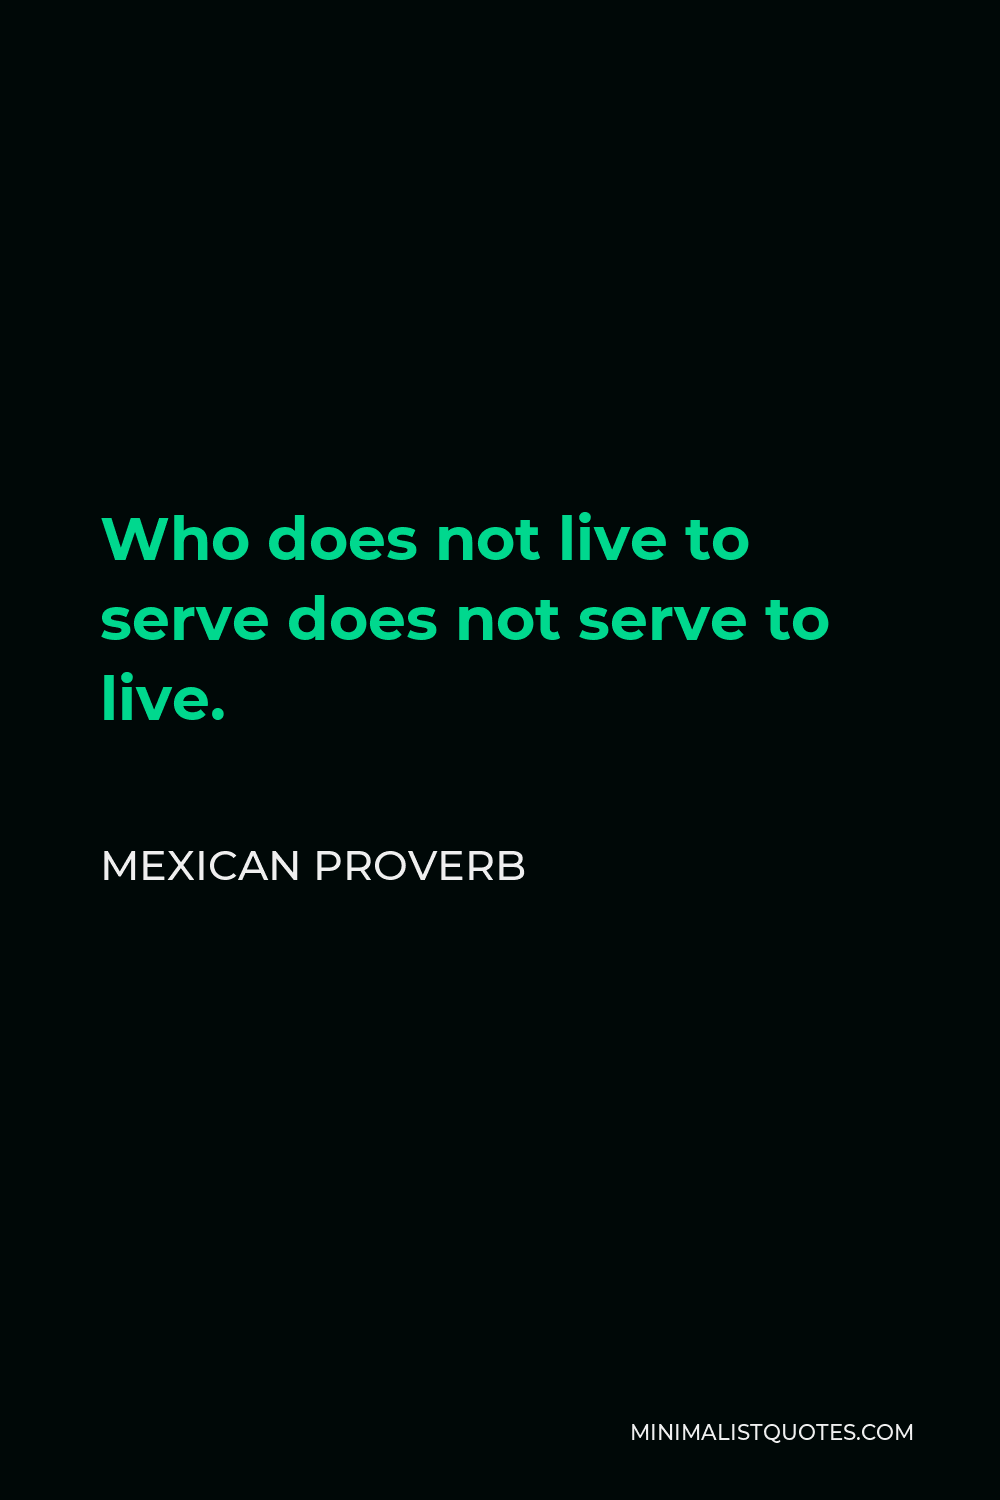 Mexican Proverb Quote - Who does not live to serve does not serve to live.